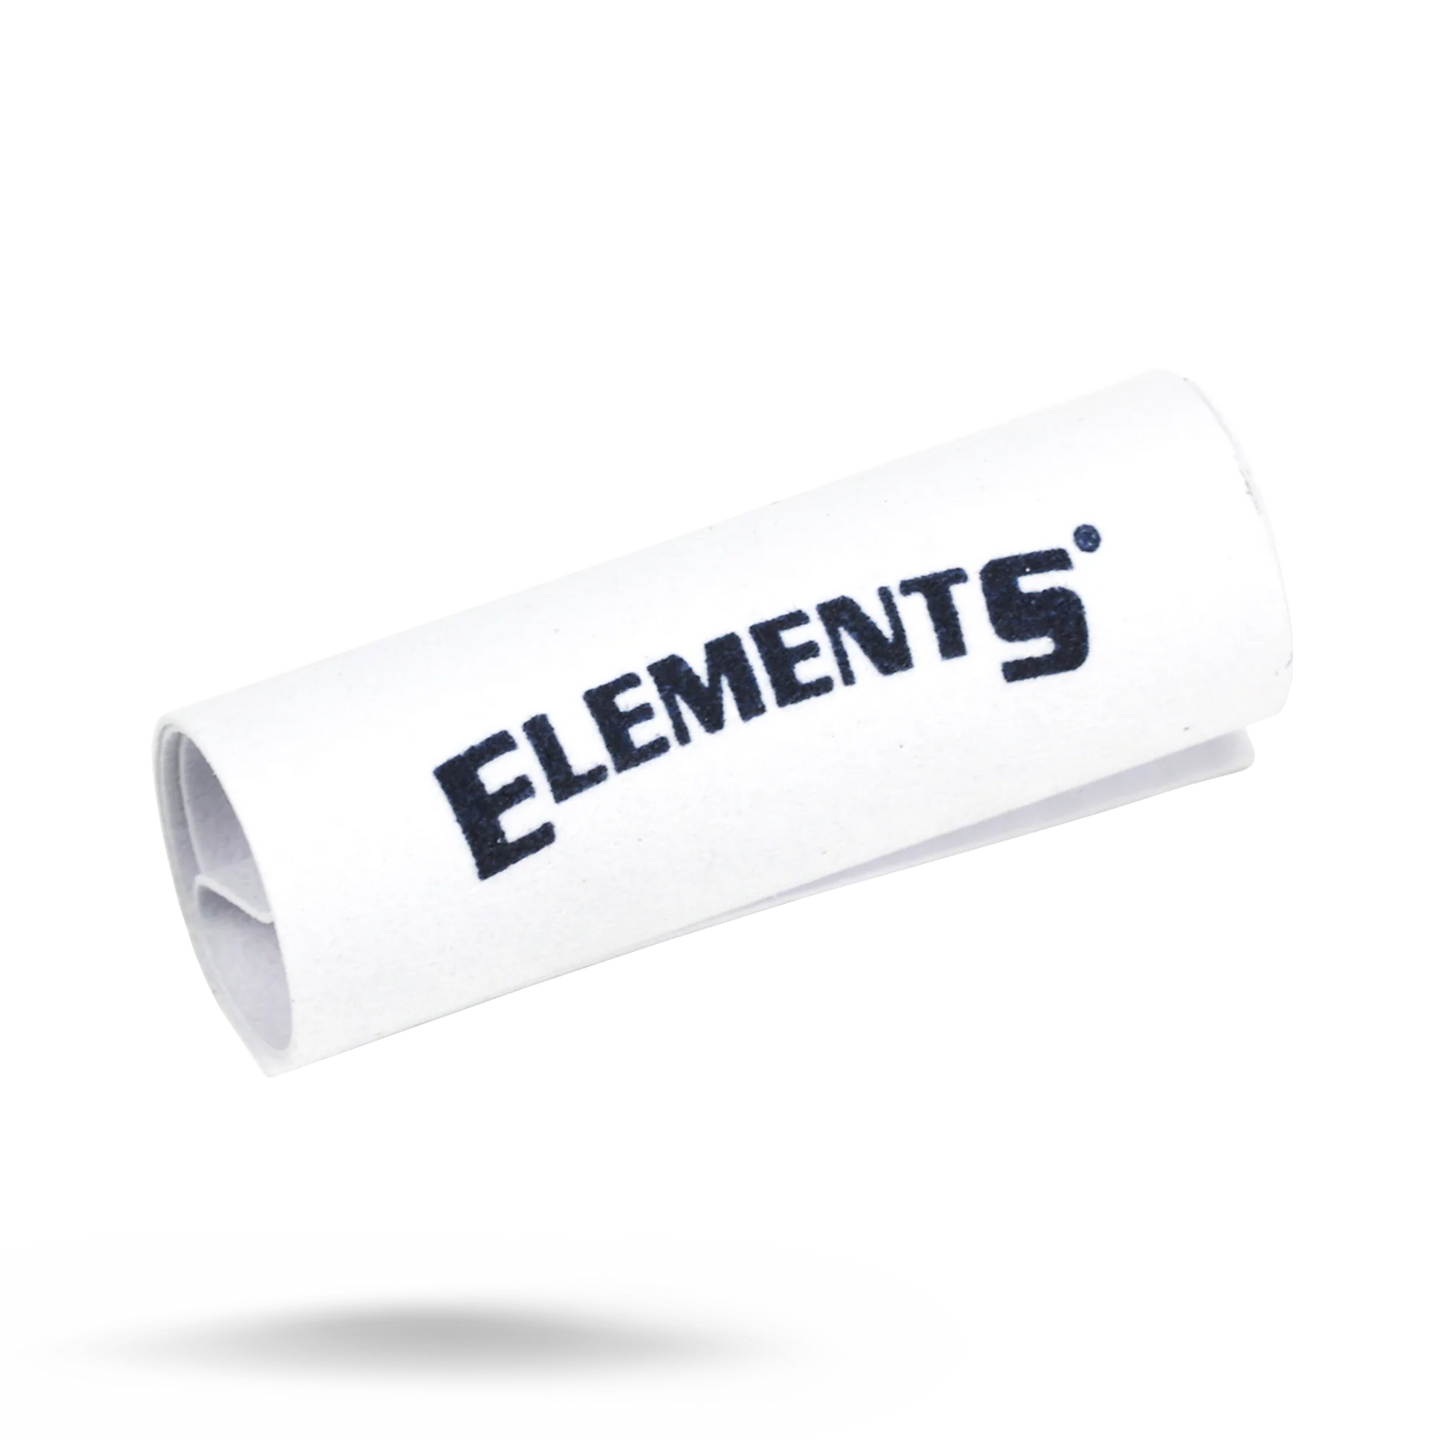 ELEMENTS PRE-ROLL TIPS 20